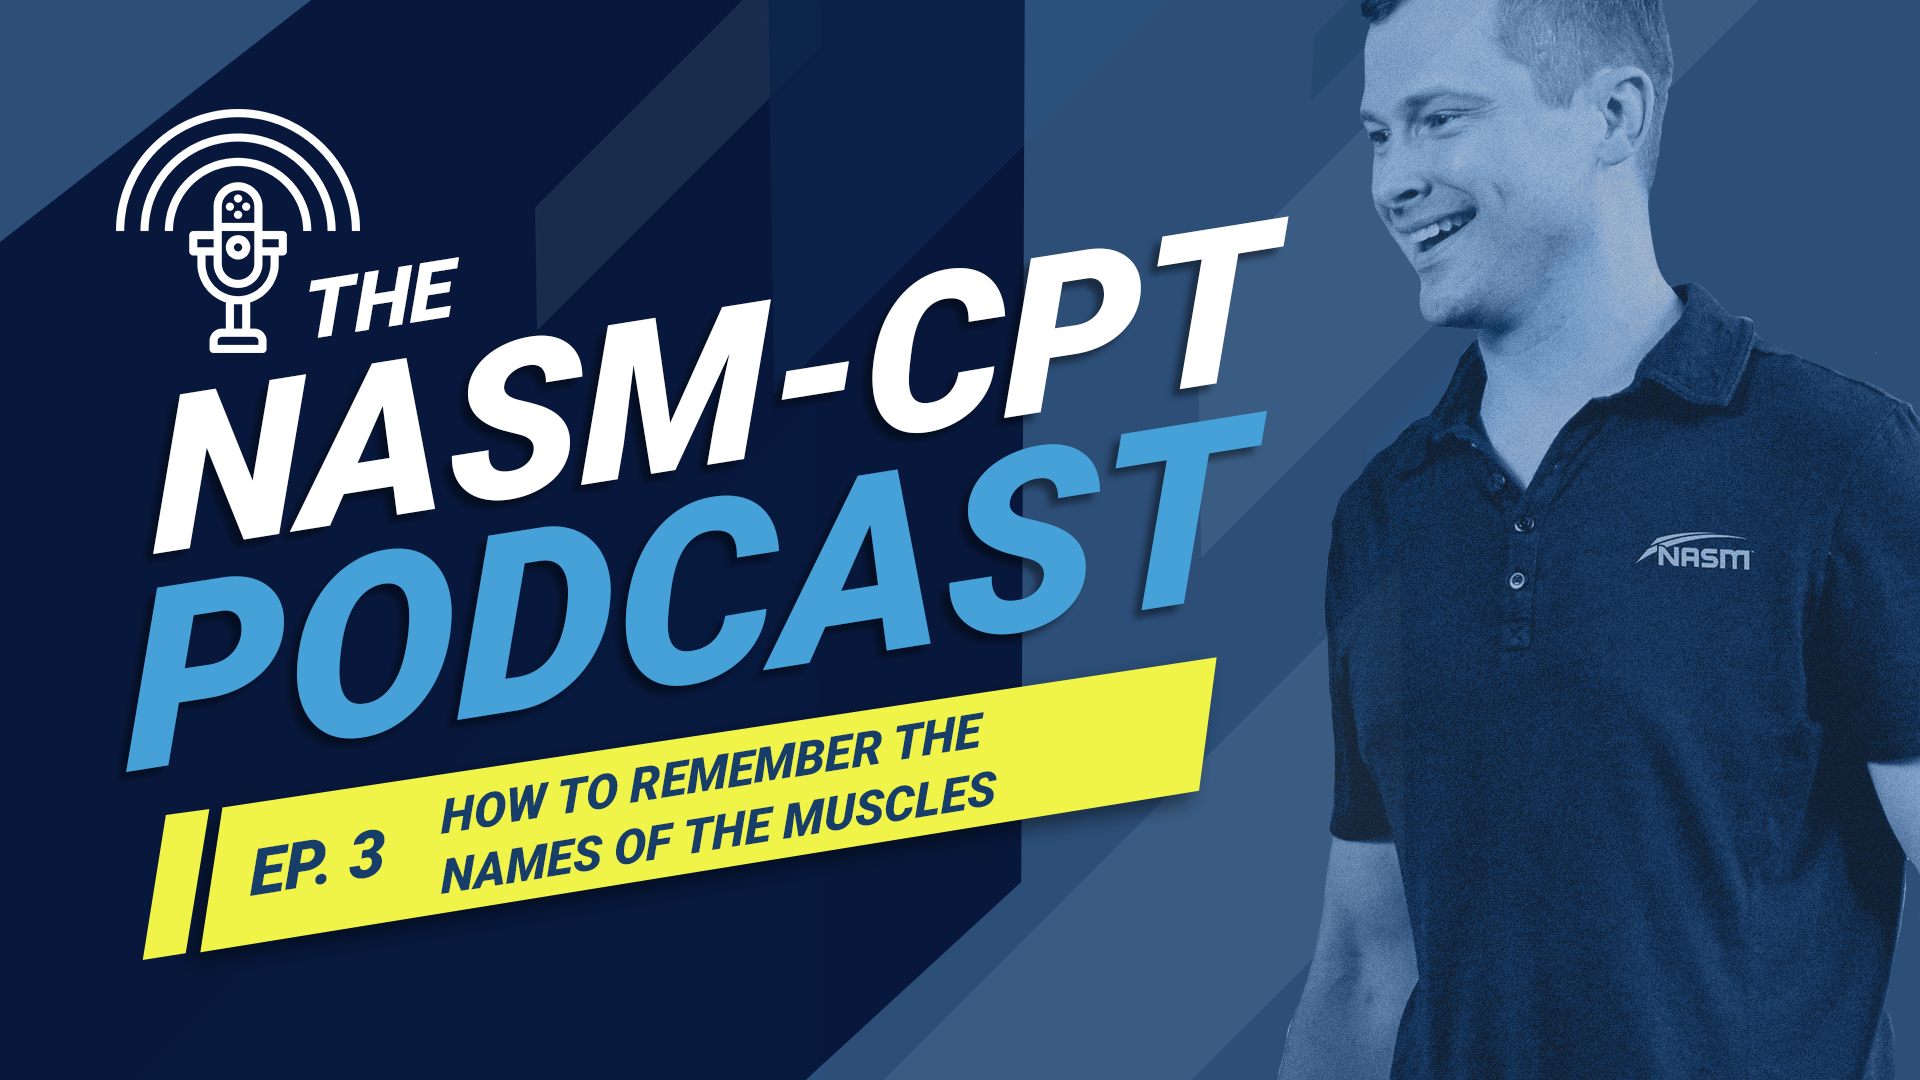 The NASM-CPT Podcast Ep. 3 How to Remember the Names of the Muscles